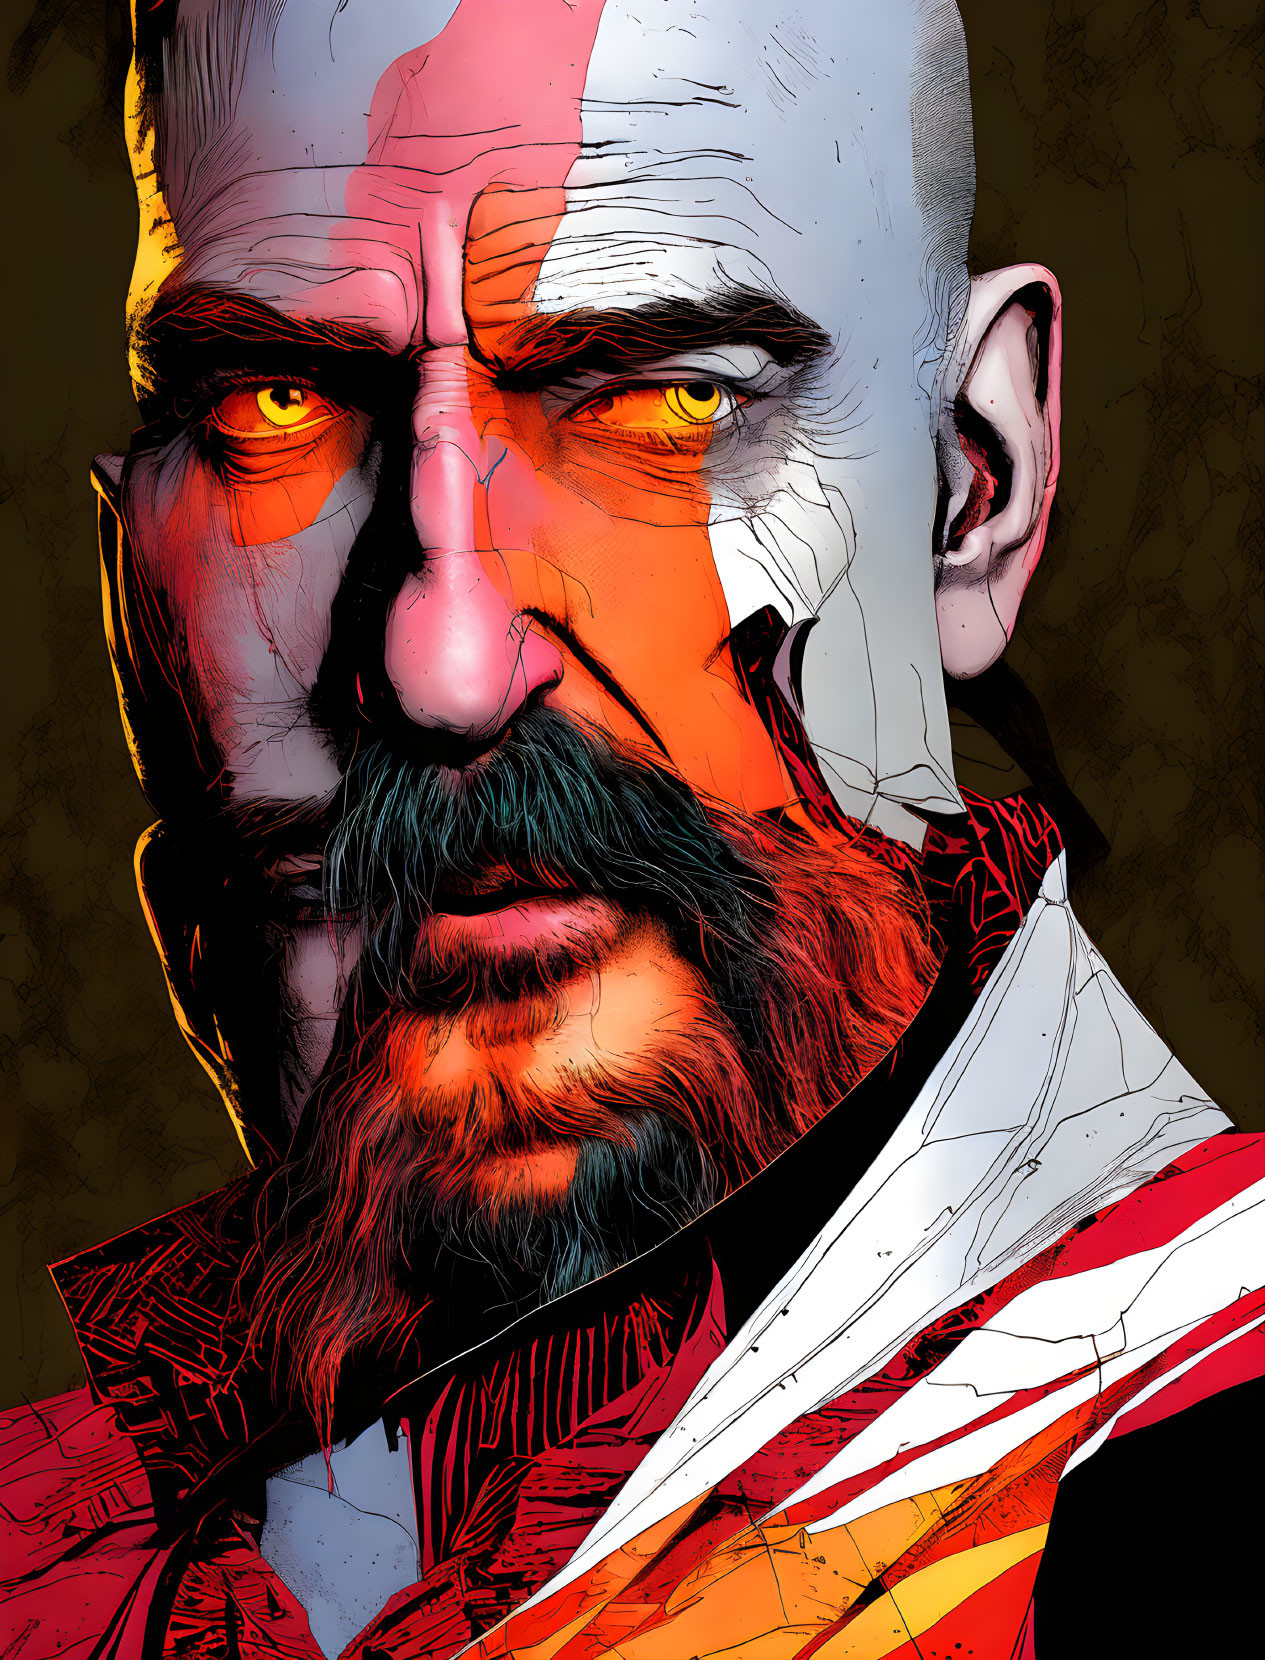 Stylized digital portrait of a man with beard and scar in red and white attire